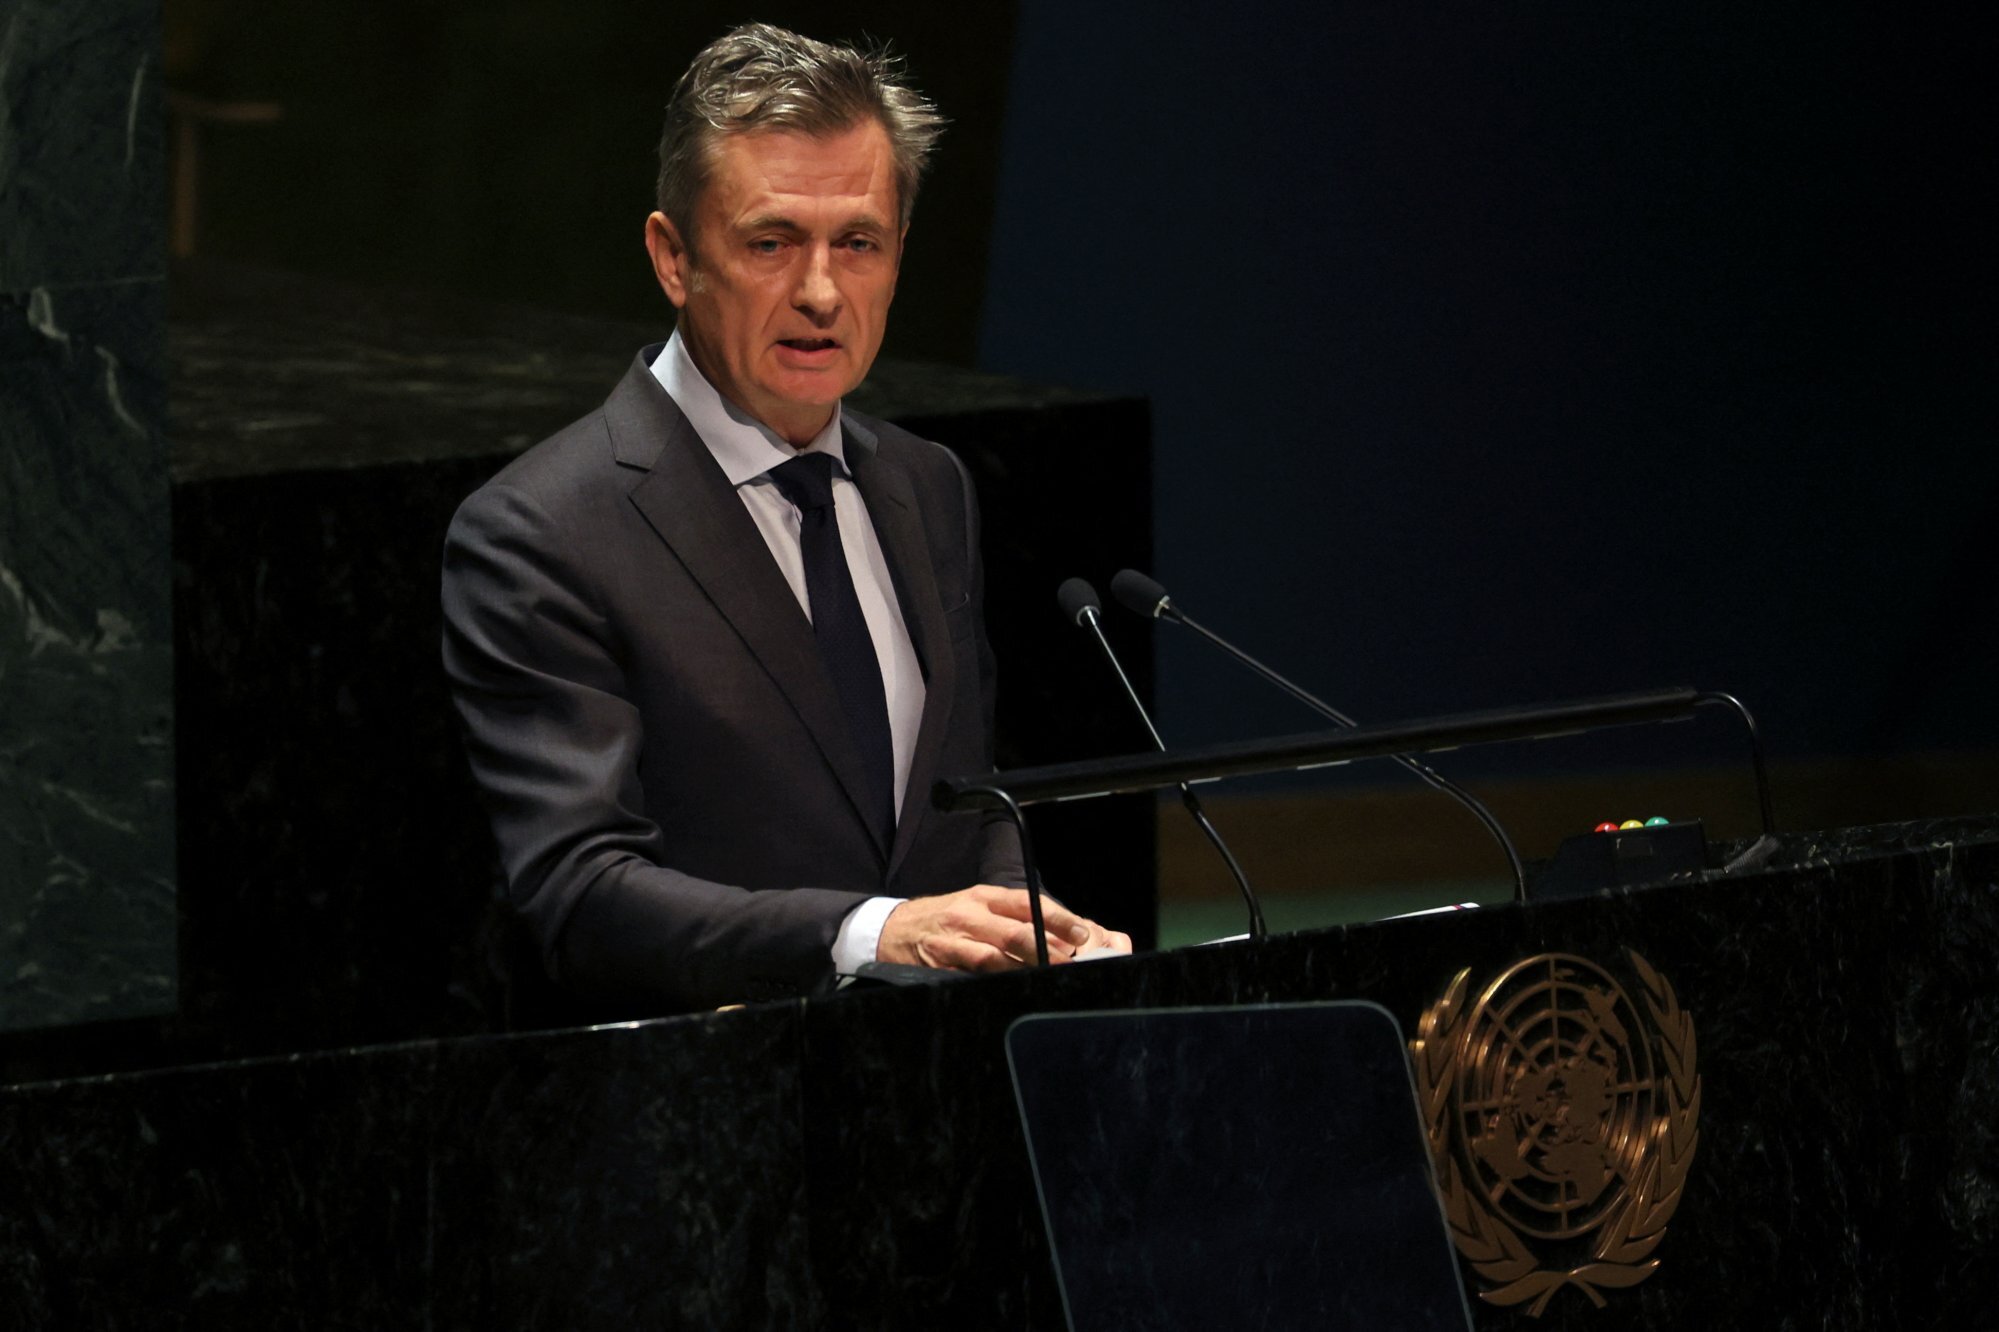 Liechtenstein’s ambassador to the United Nations Christian Wenaweser speaking to the UN General Assembly on April 26 before it passed a resolution requiring the assembly to convene on any issue a Security Council member has vetoed. Photo: Reuters